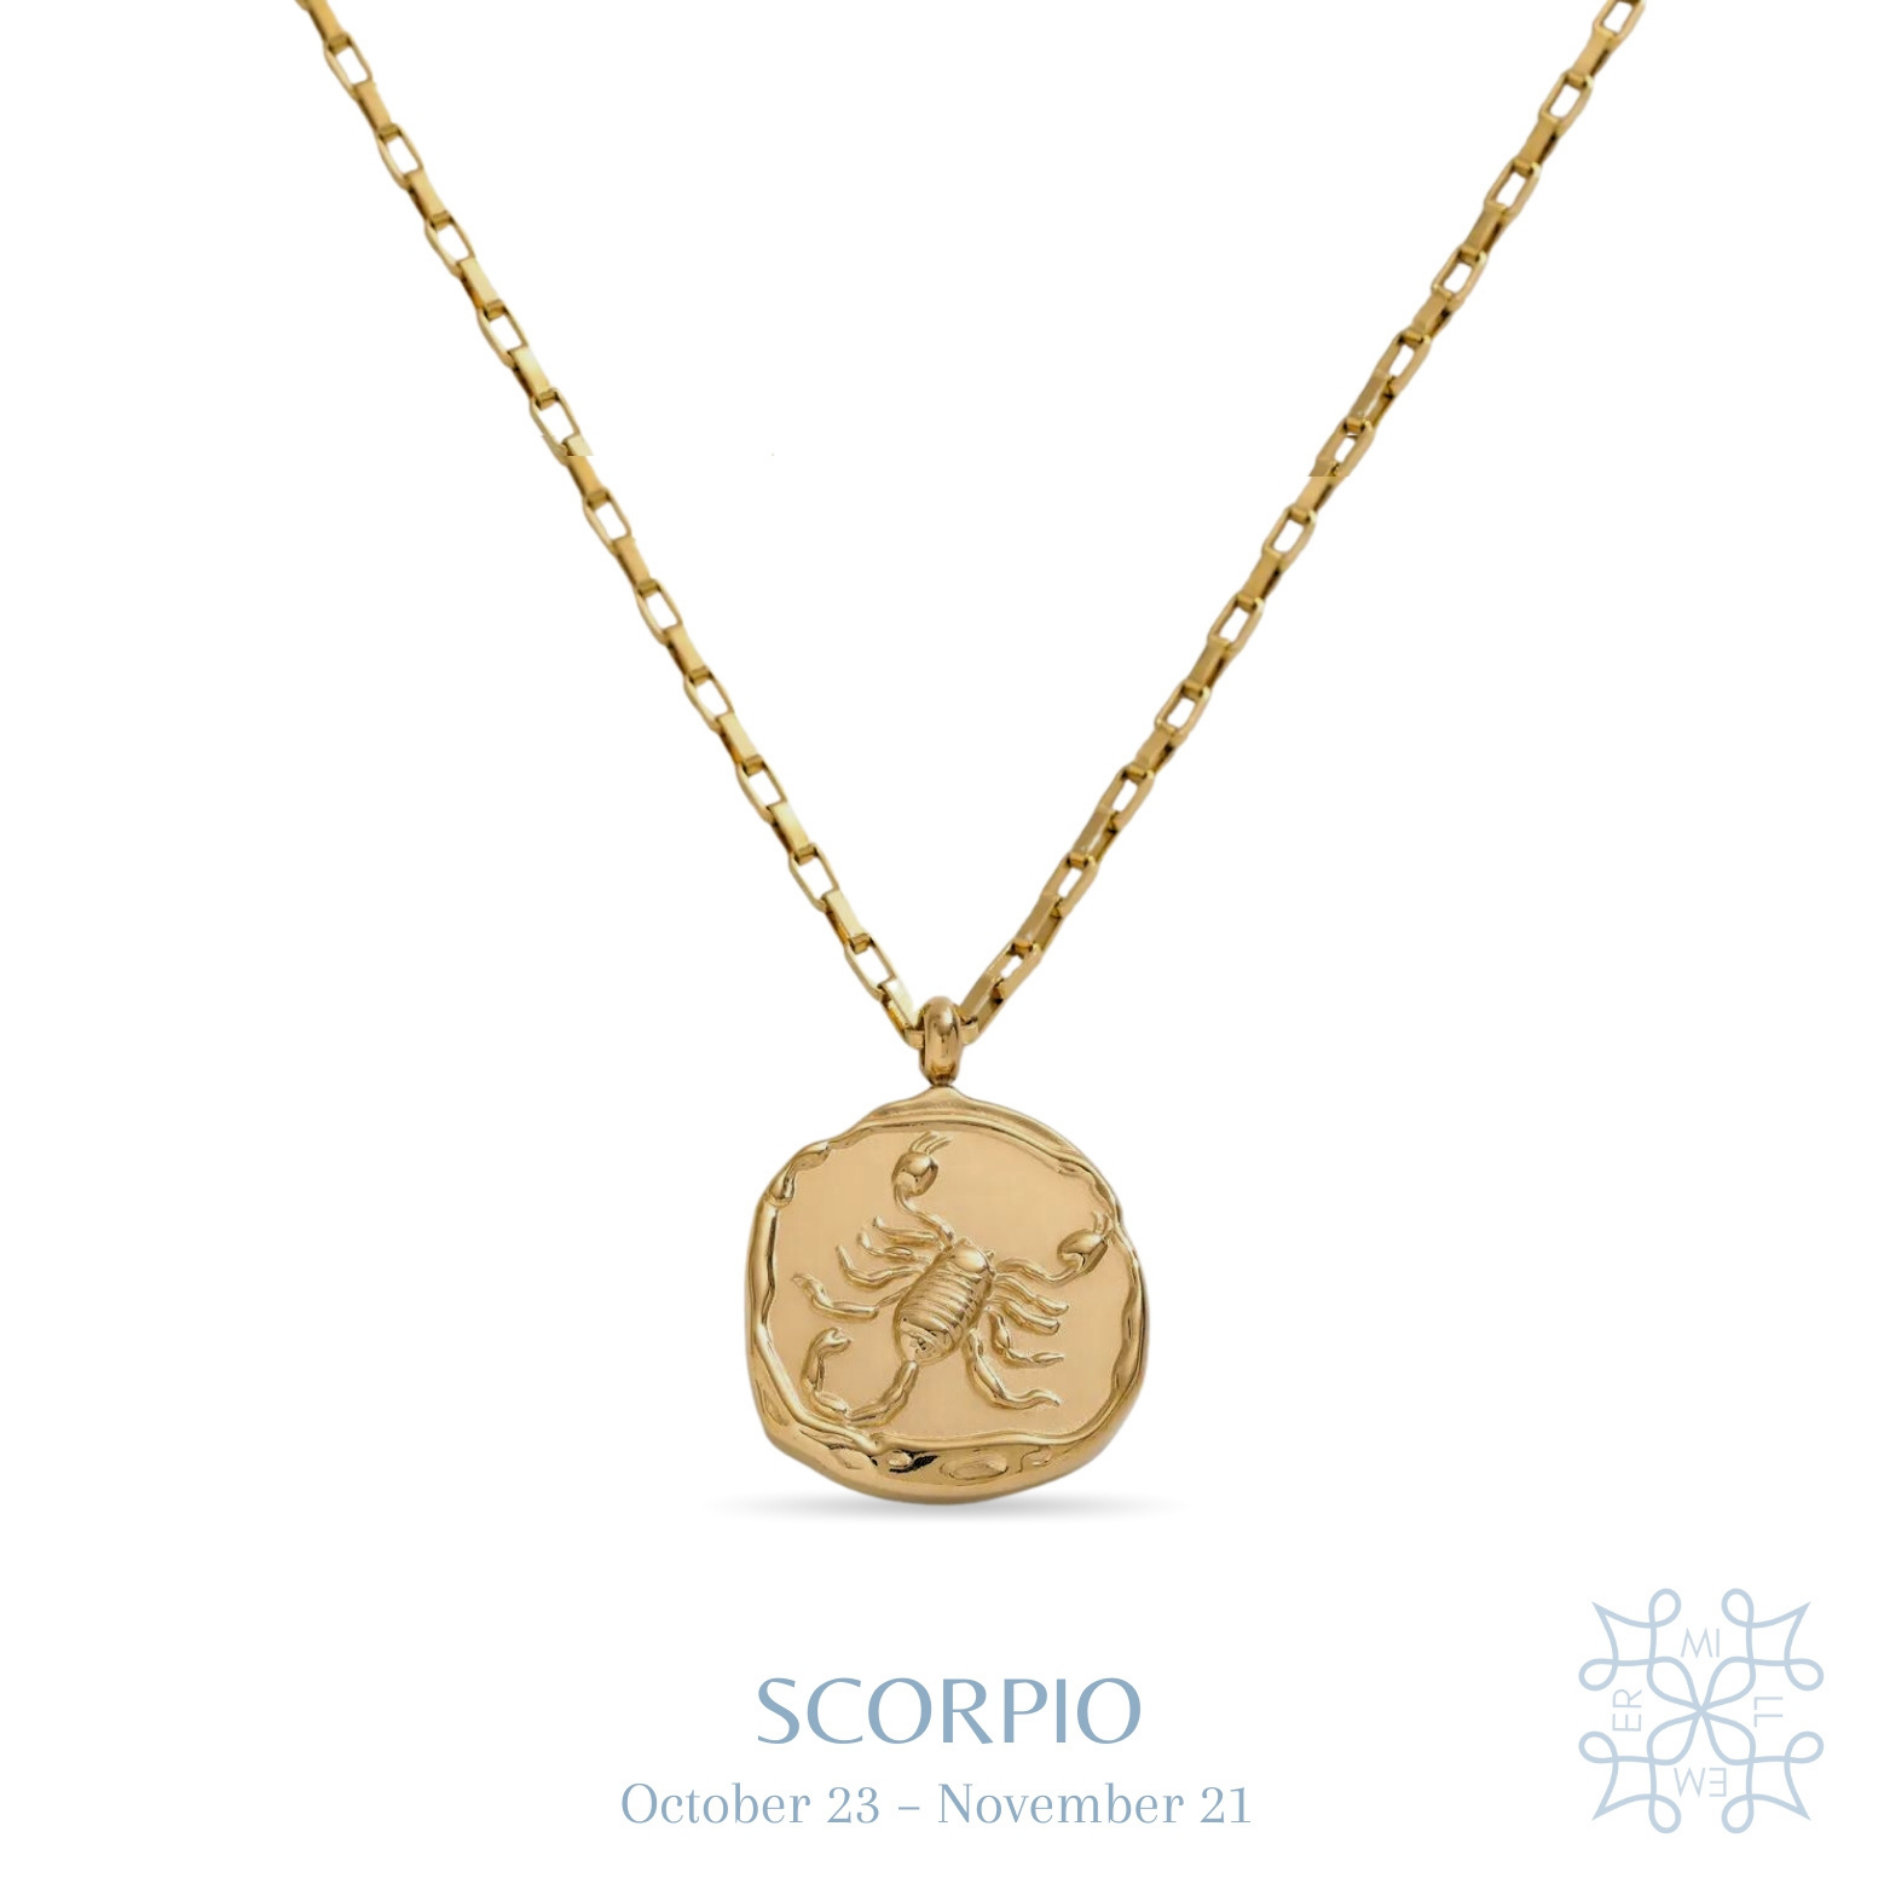 Irregular shape round medallion with Scorpio symbol in the middle. Gold plated chain and medallion necklace. Scorpio medallion gold necklace.